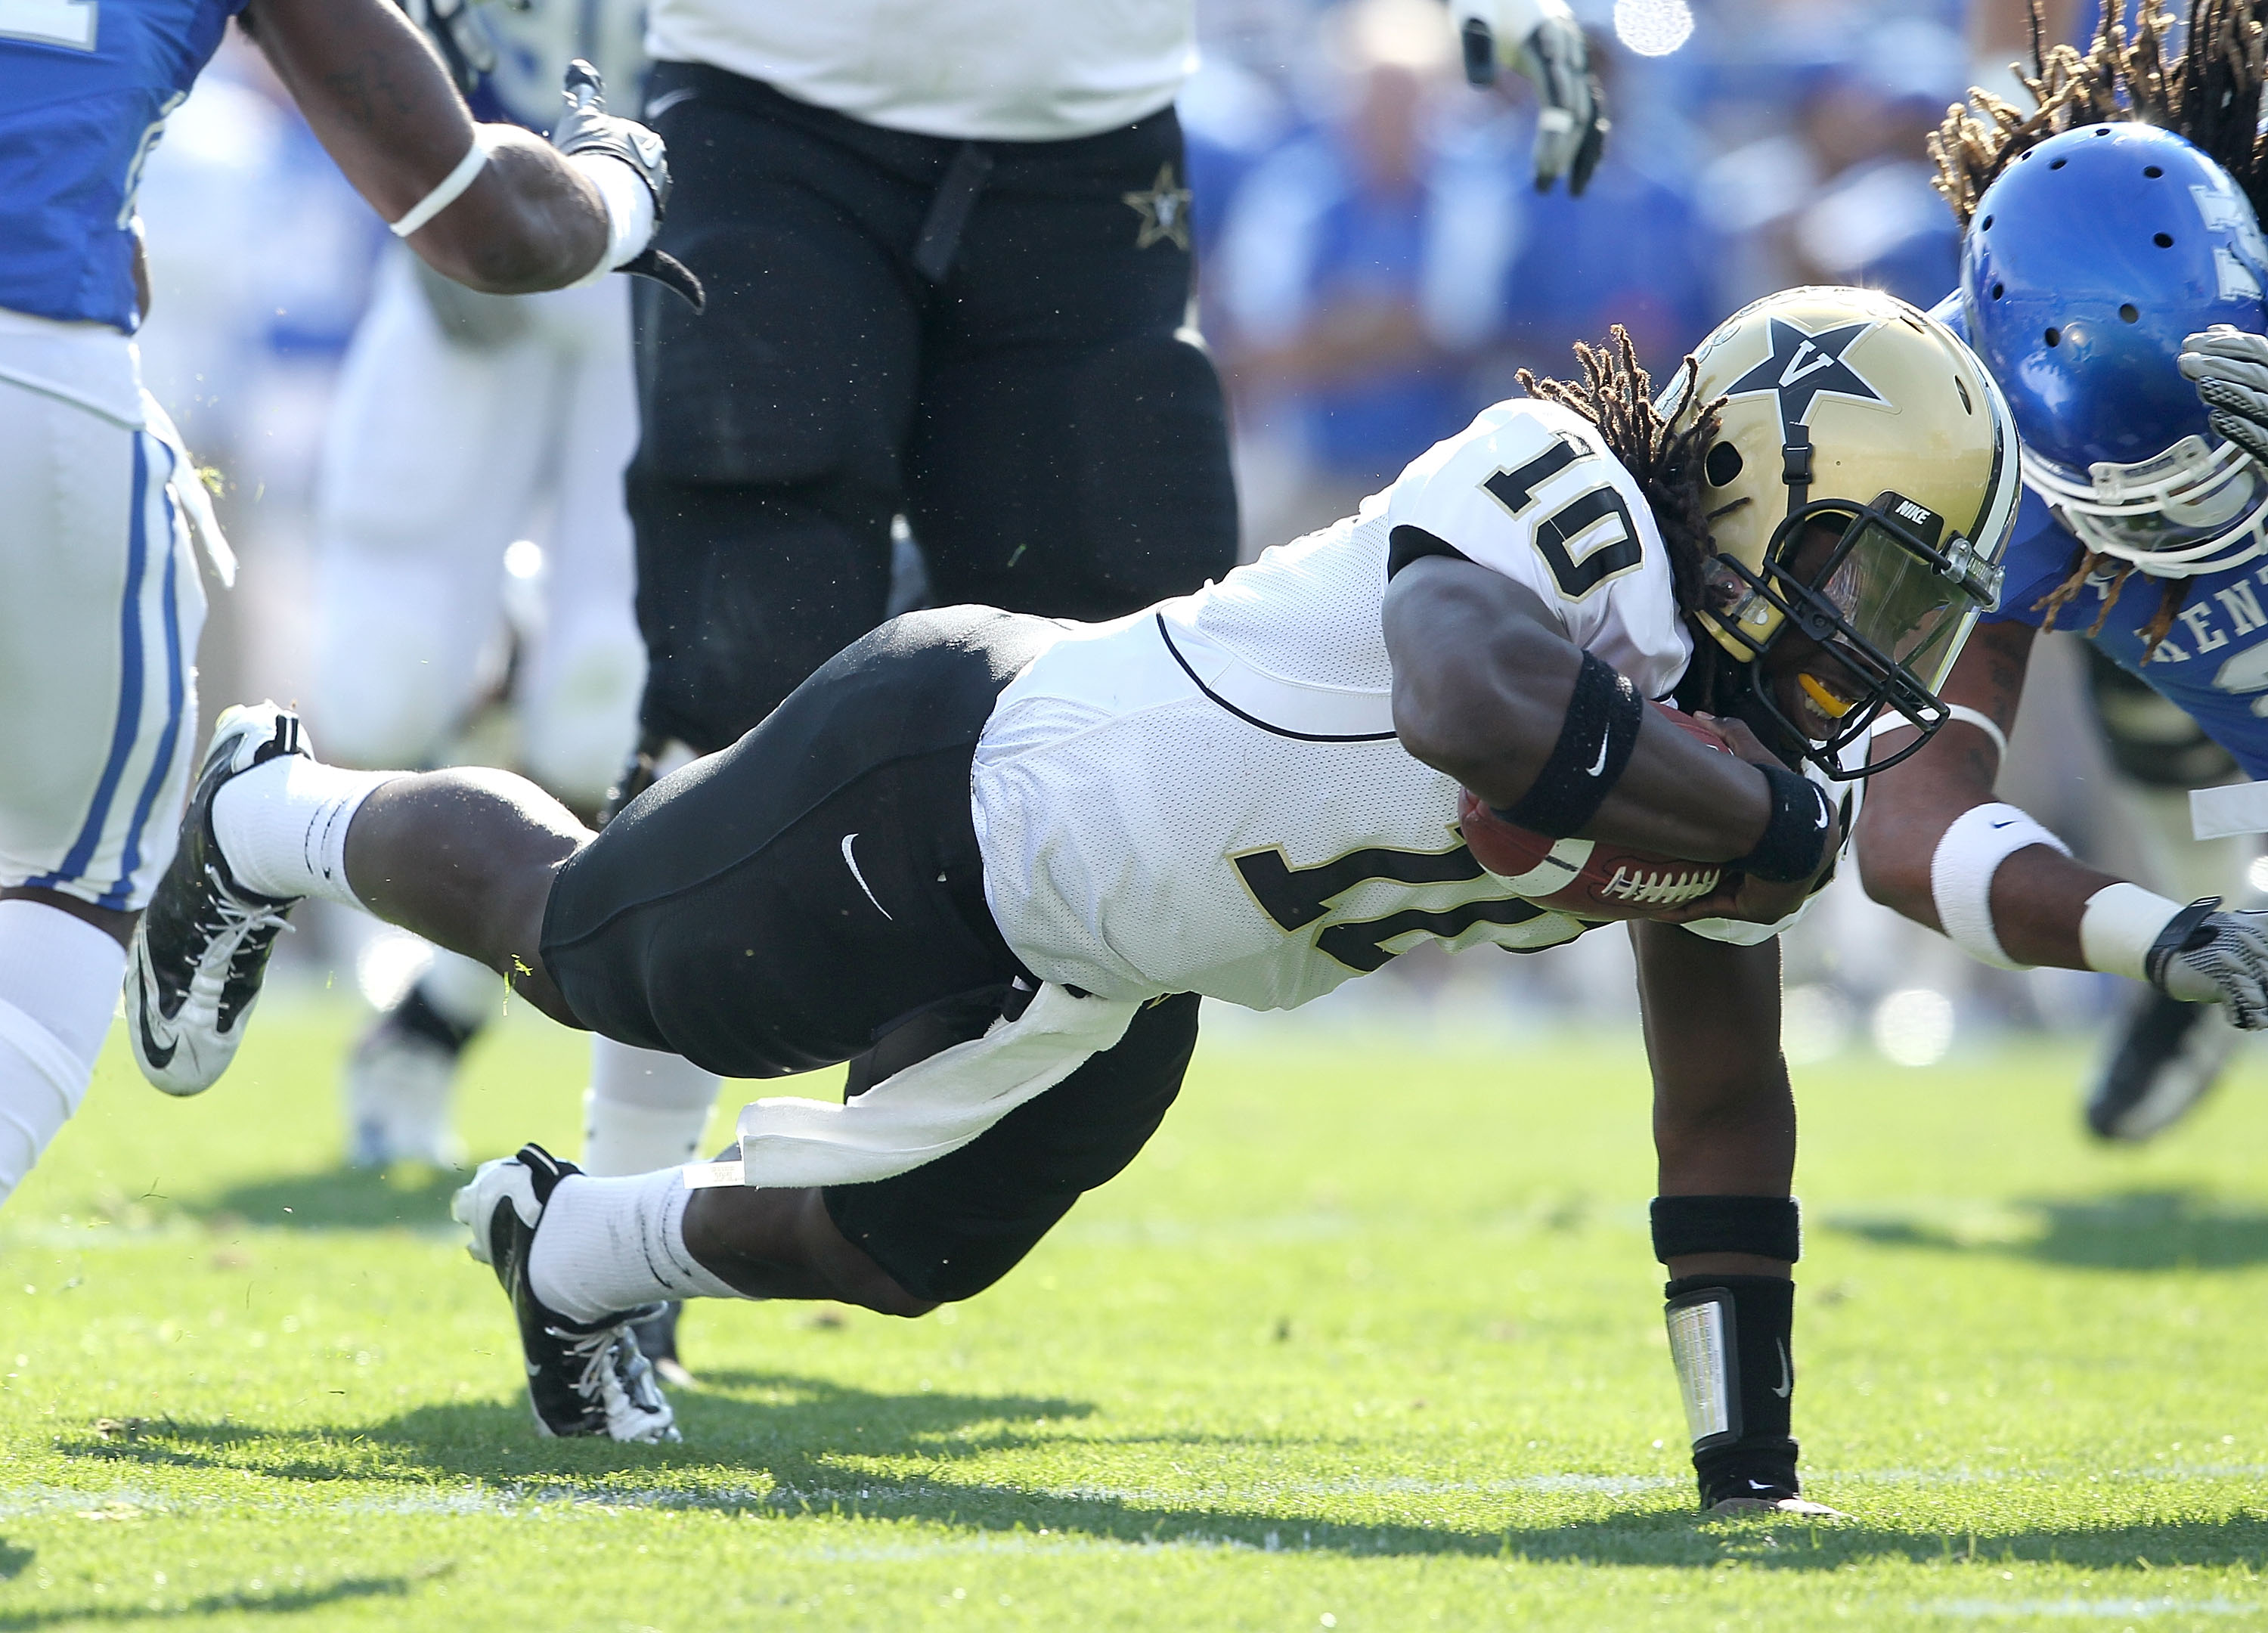 LEXINGTON, KY - NOVEMBER 13:  Larry Smith #10 of the Vanderbilt Commodores runs with the ball during the game against the Kentucky Wildcats  at Commonwealth Stadium on November 13, 2010 in Lexington, Kentucky.  (Photo by Andy Lyons/Getty Images)